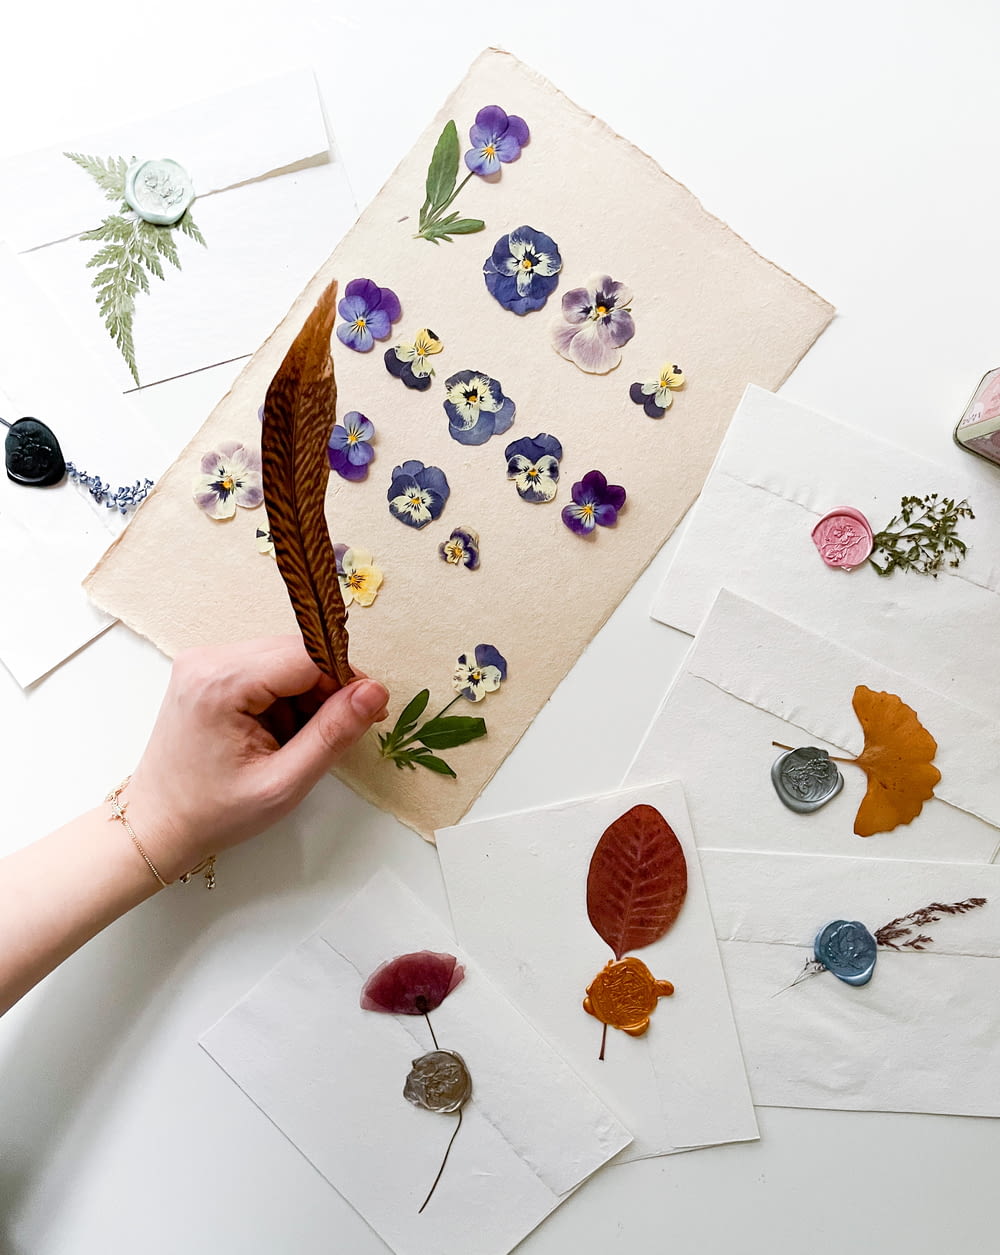 a person holding a feather over a bunch of pressed flowers